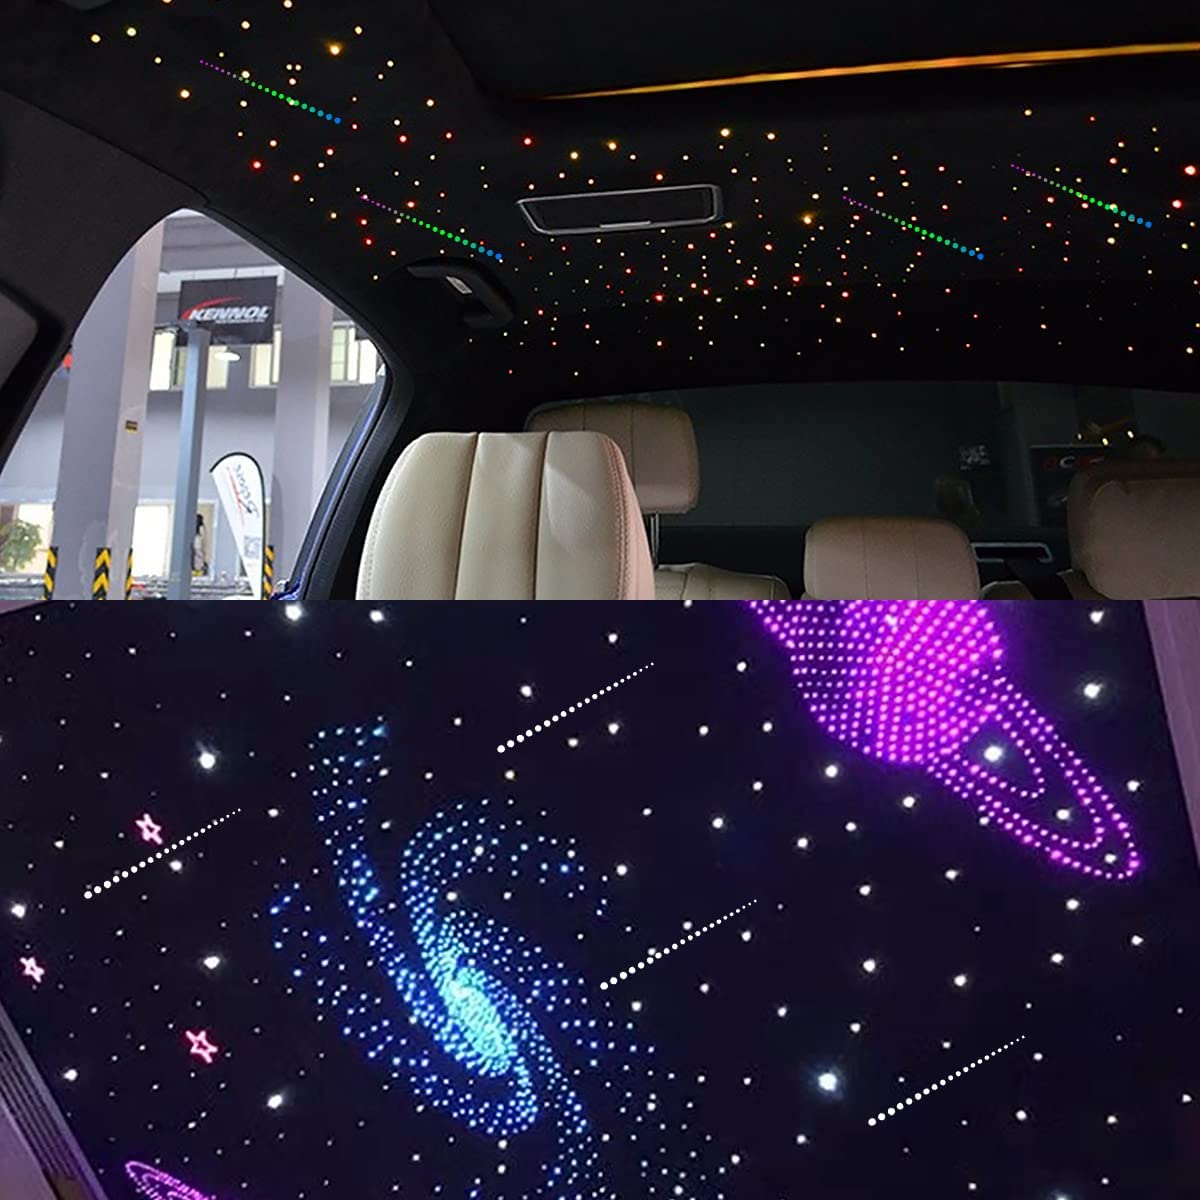 Smart 2*16W Dual Color Rolls Royce Star Lights for Car Truck's Headliner with Colorful Shooting Stars | STARLIGHTheadliners.shop